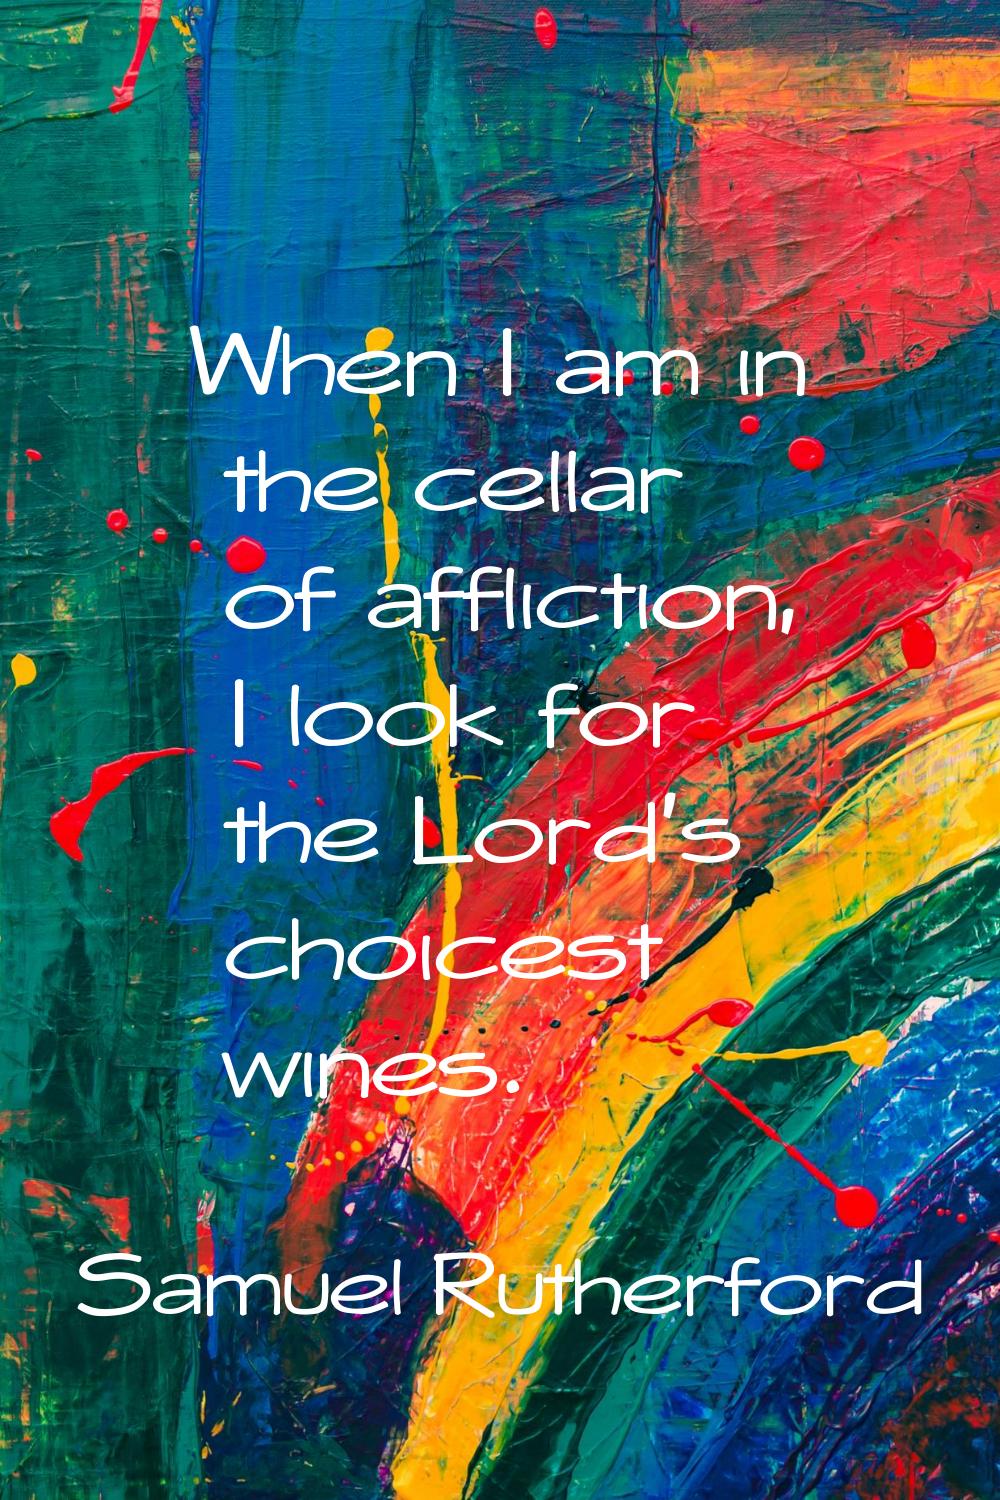 When I am in the cellar of affliction, I look for the Lord's choicest wines.